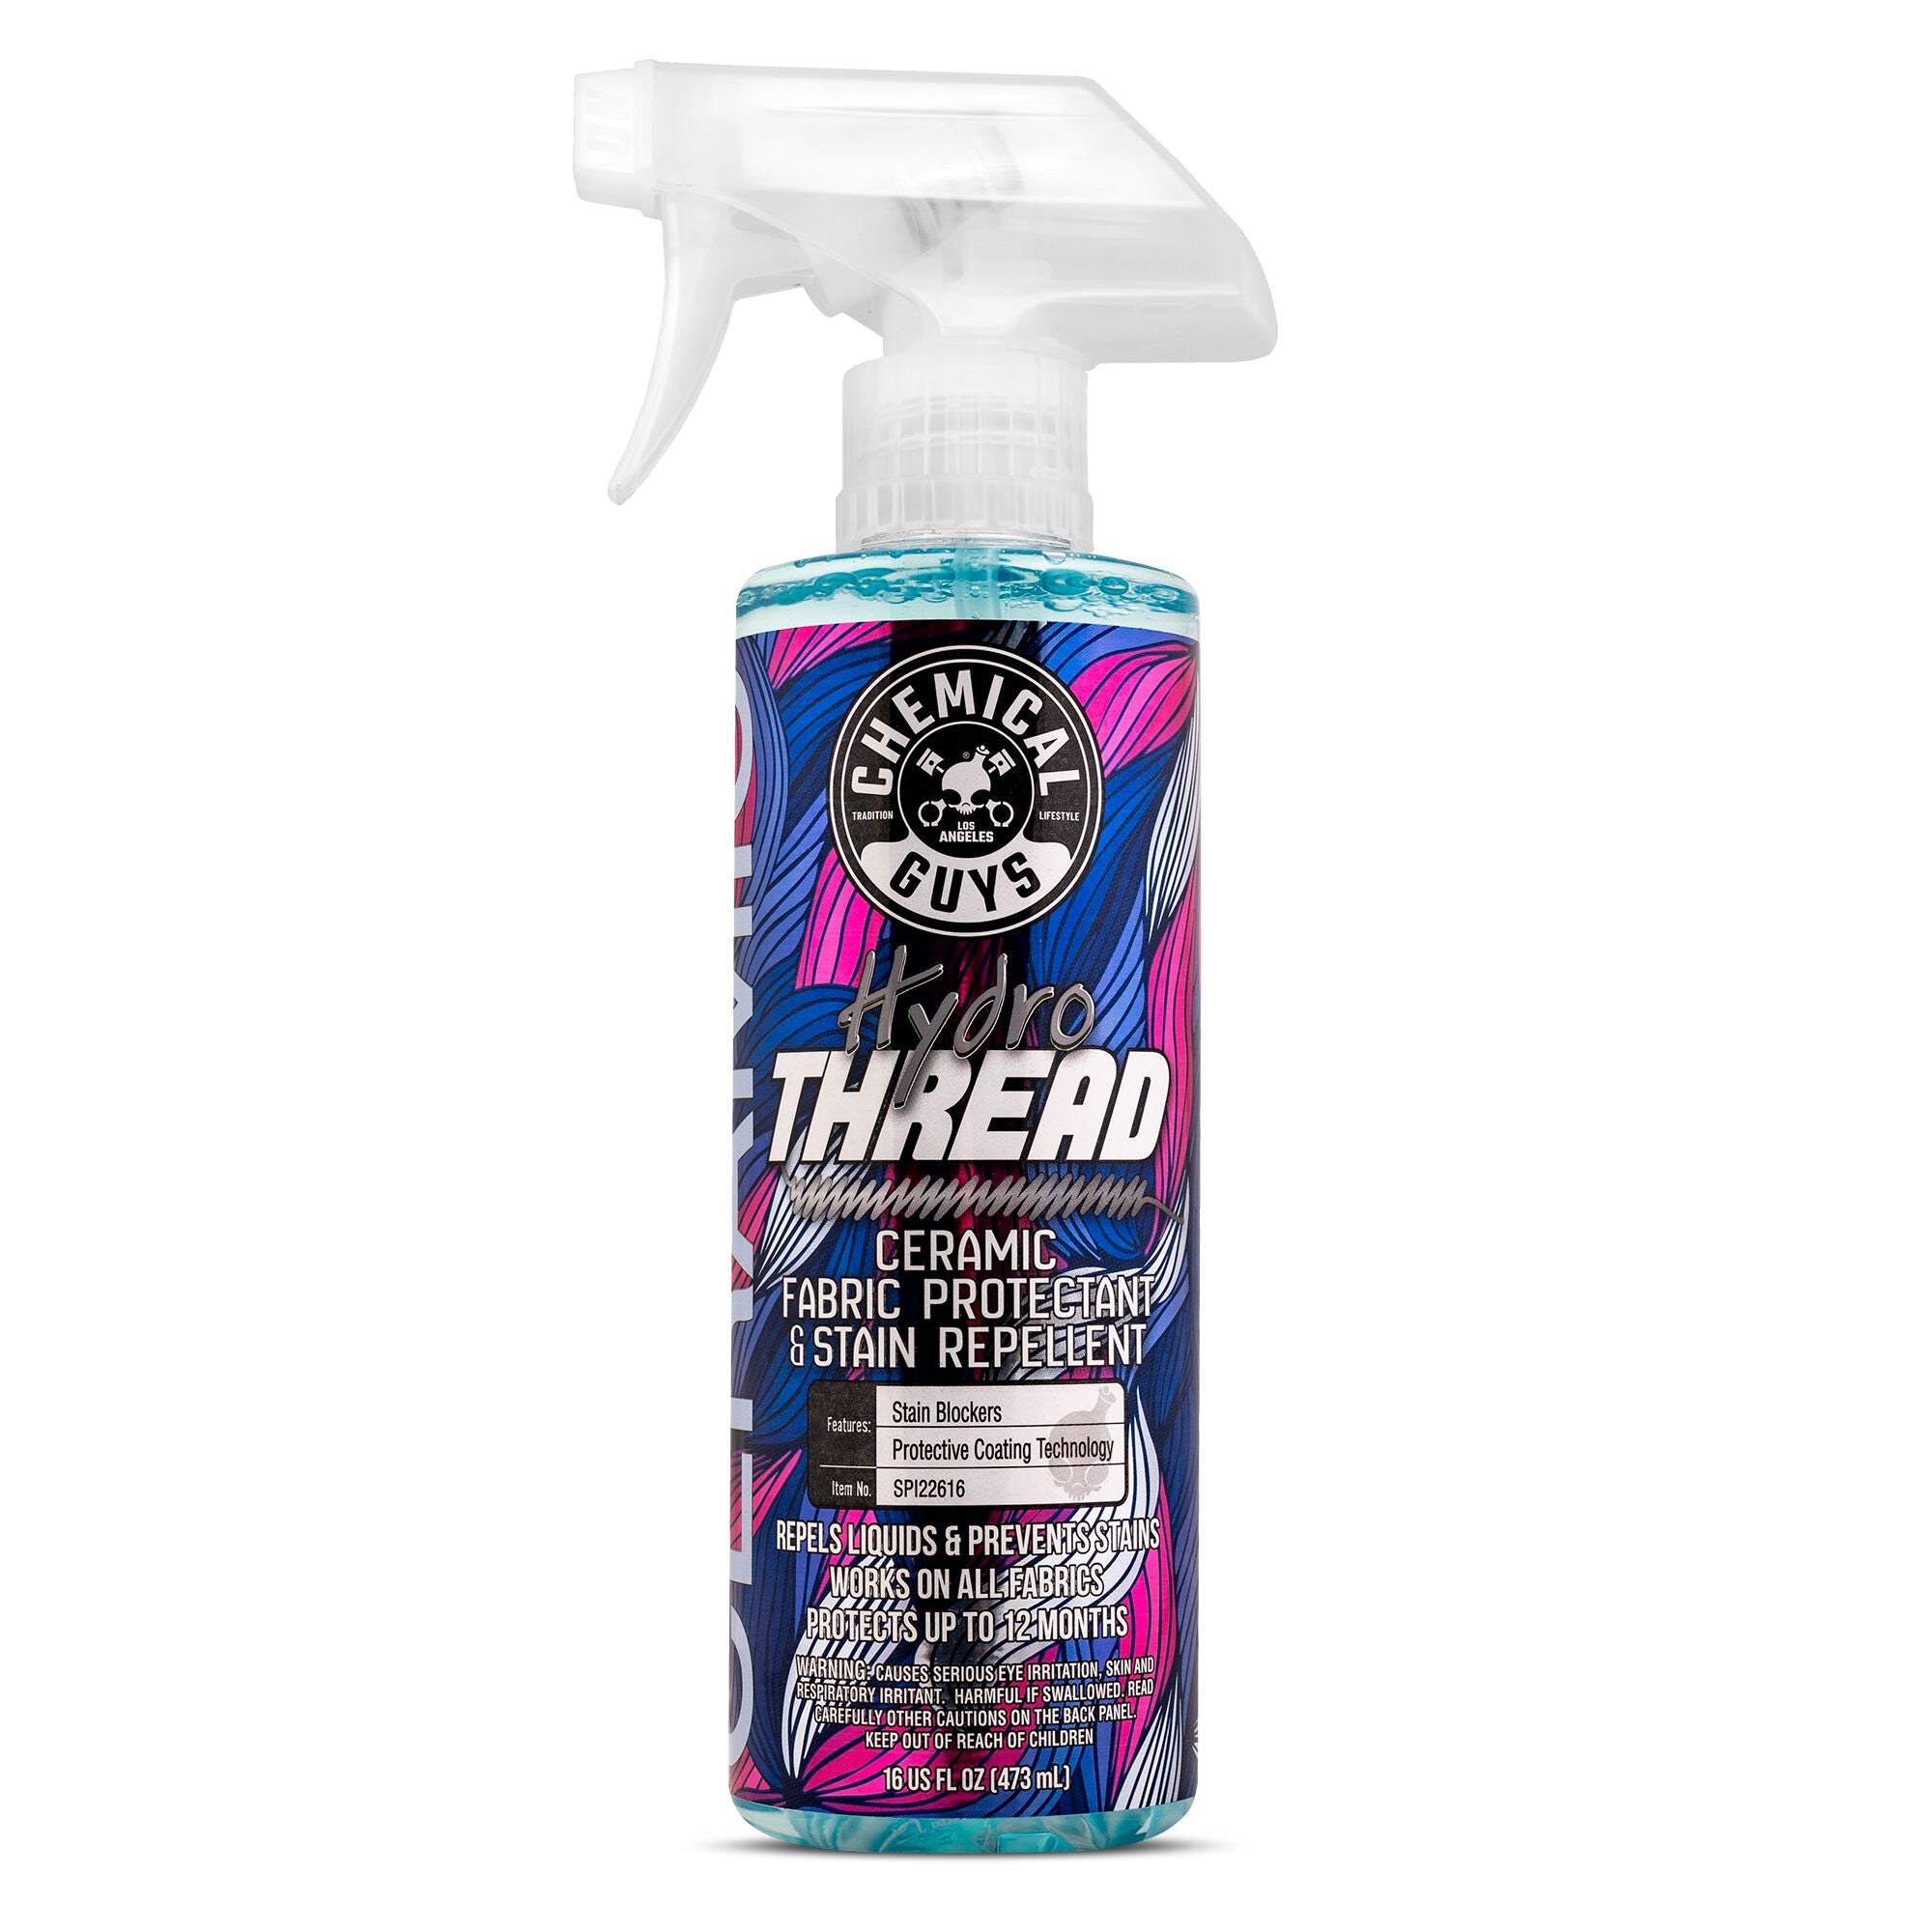 HydroThread Ceramic Fabric Protectant & Stain Repellent | Chemical 